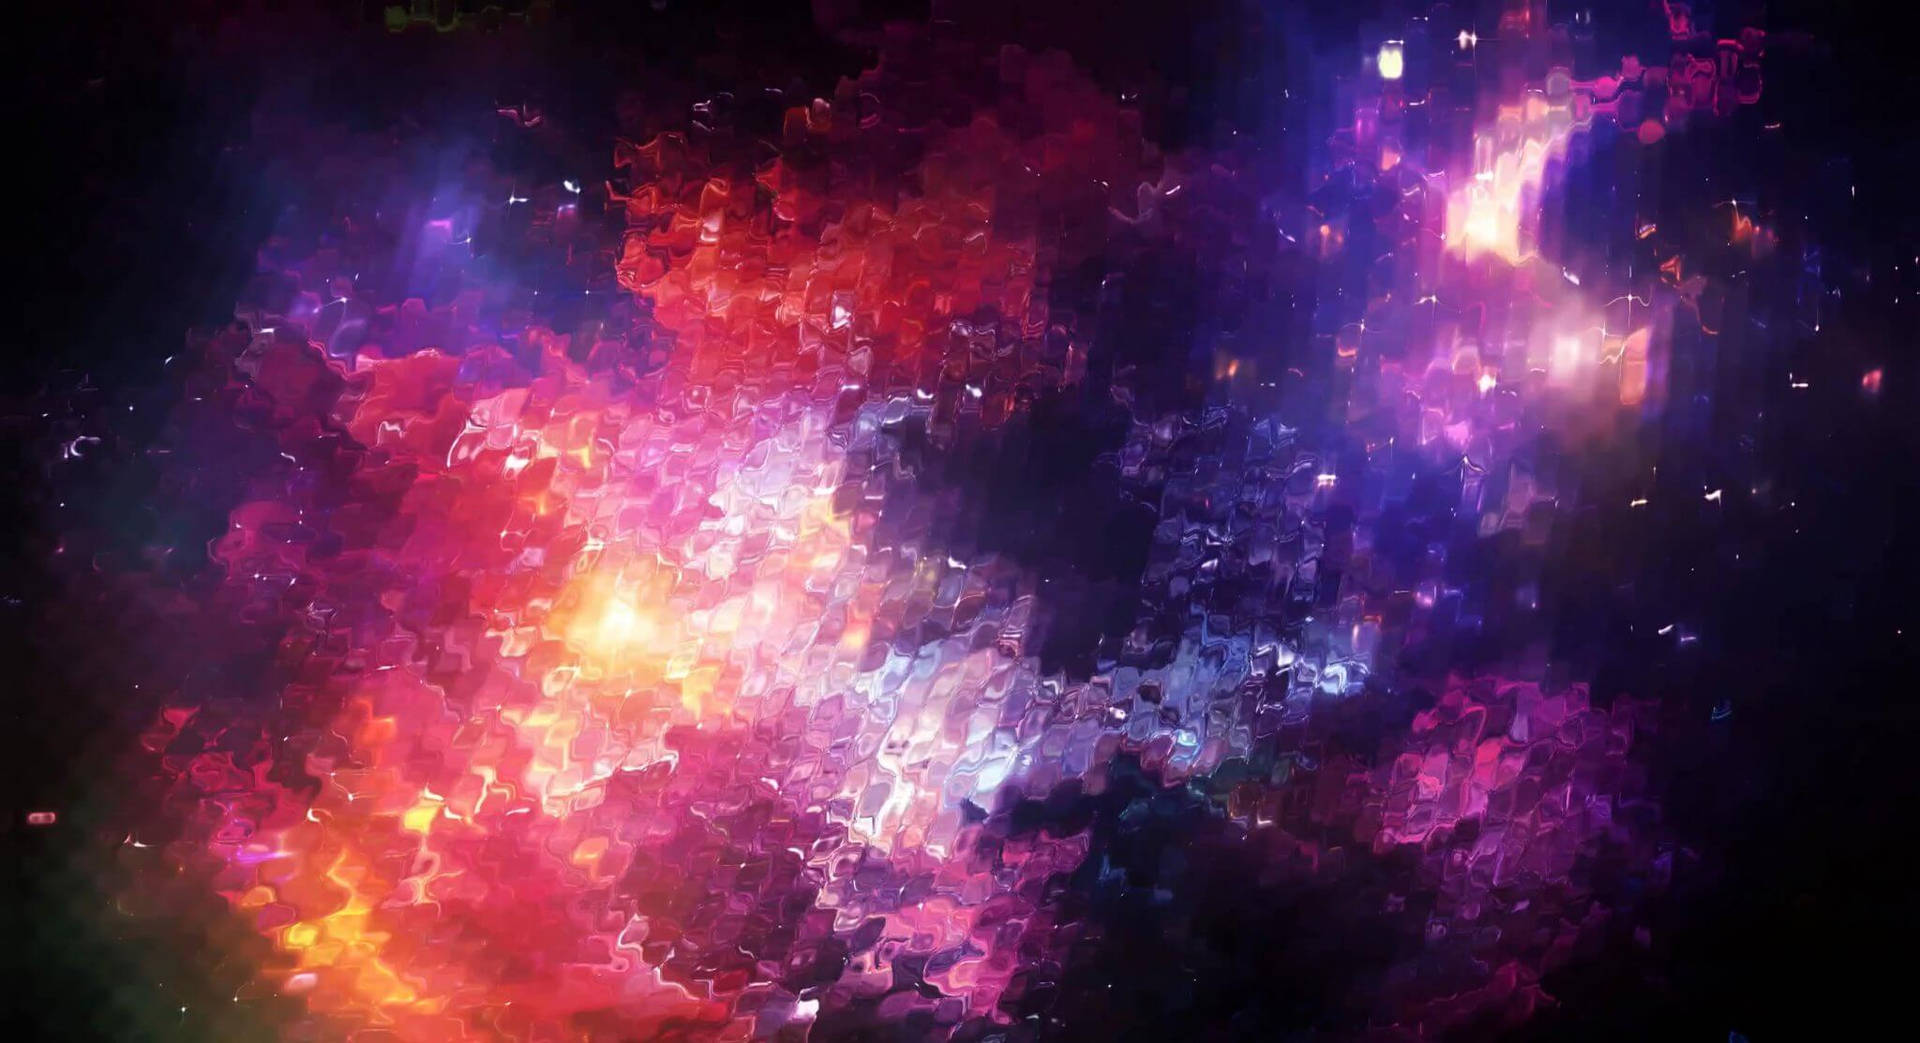 Galaxy Animated Wallpapers